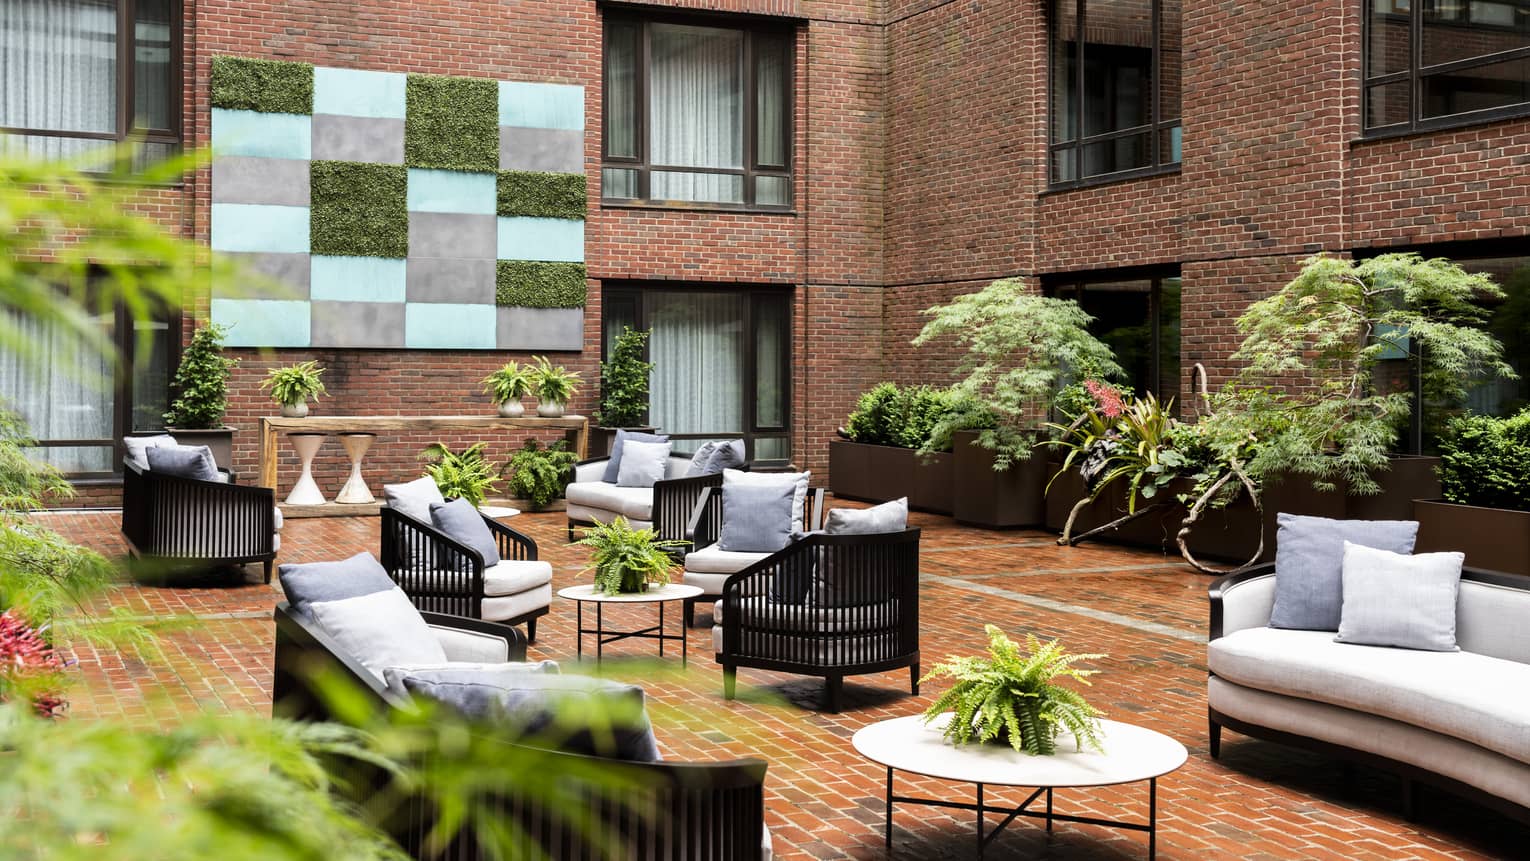 An outdoor seating area with grey sofas and chairs, surrounded by red brick walls.